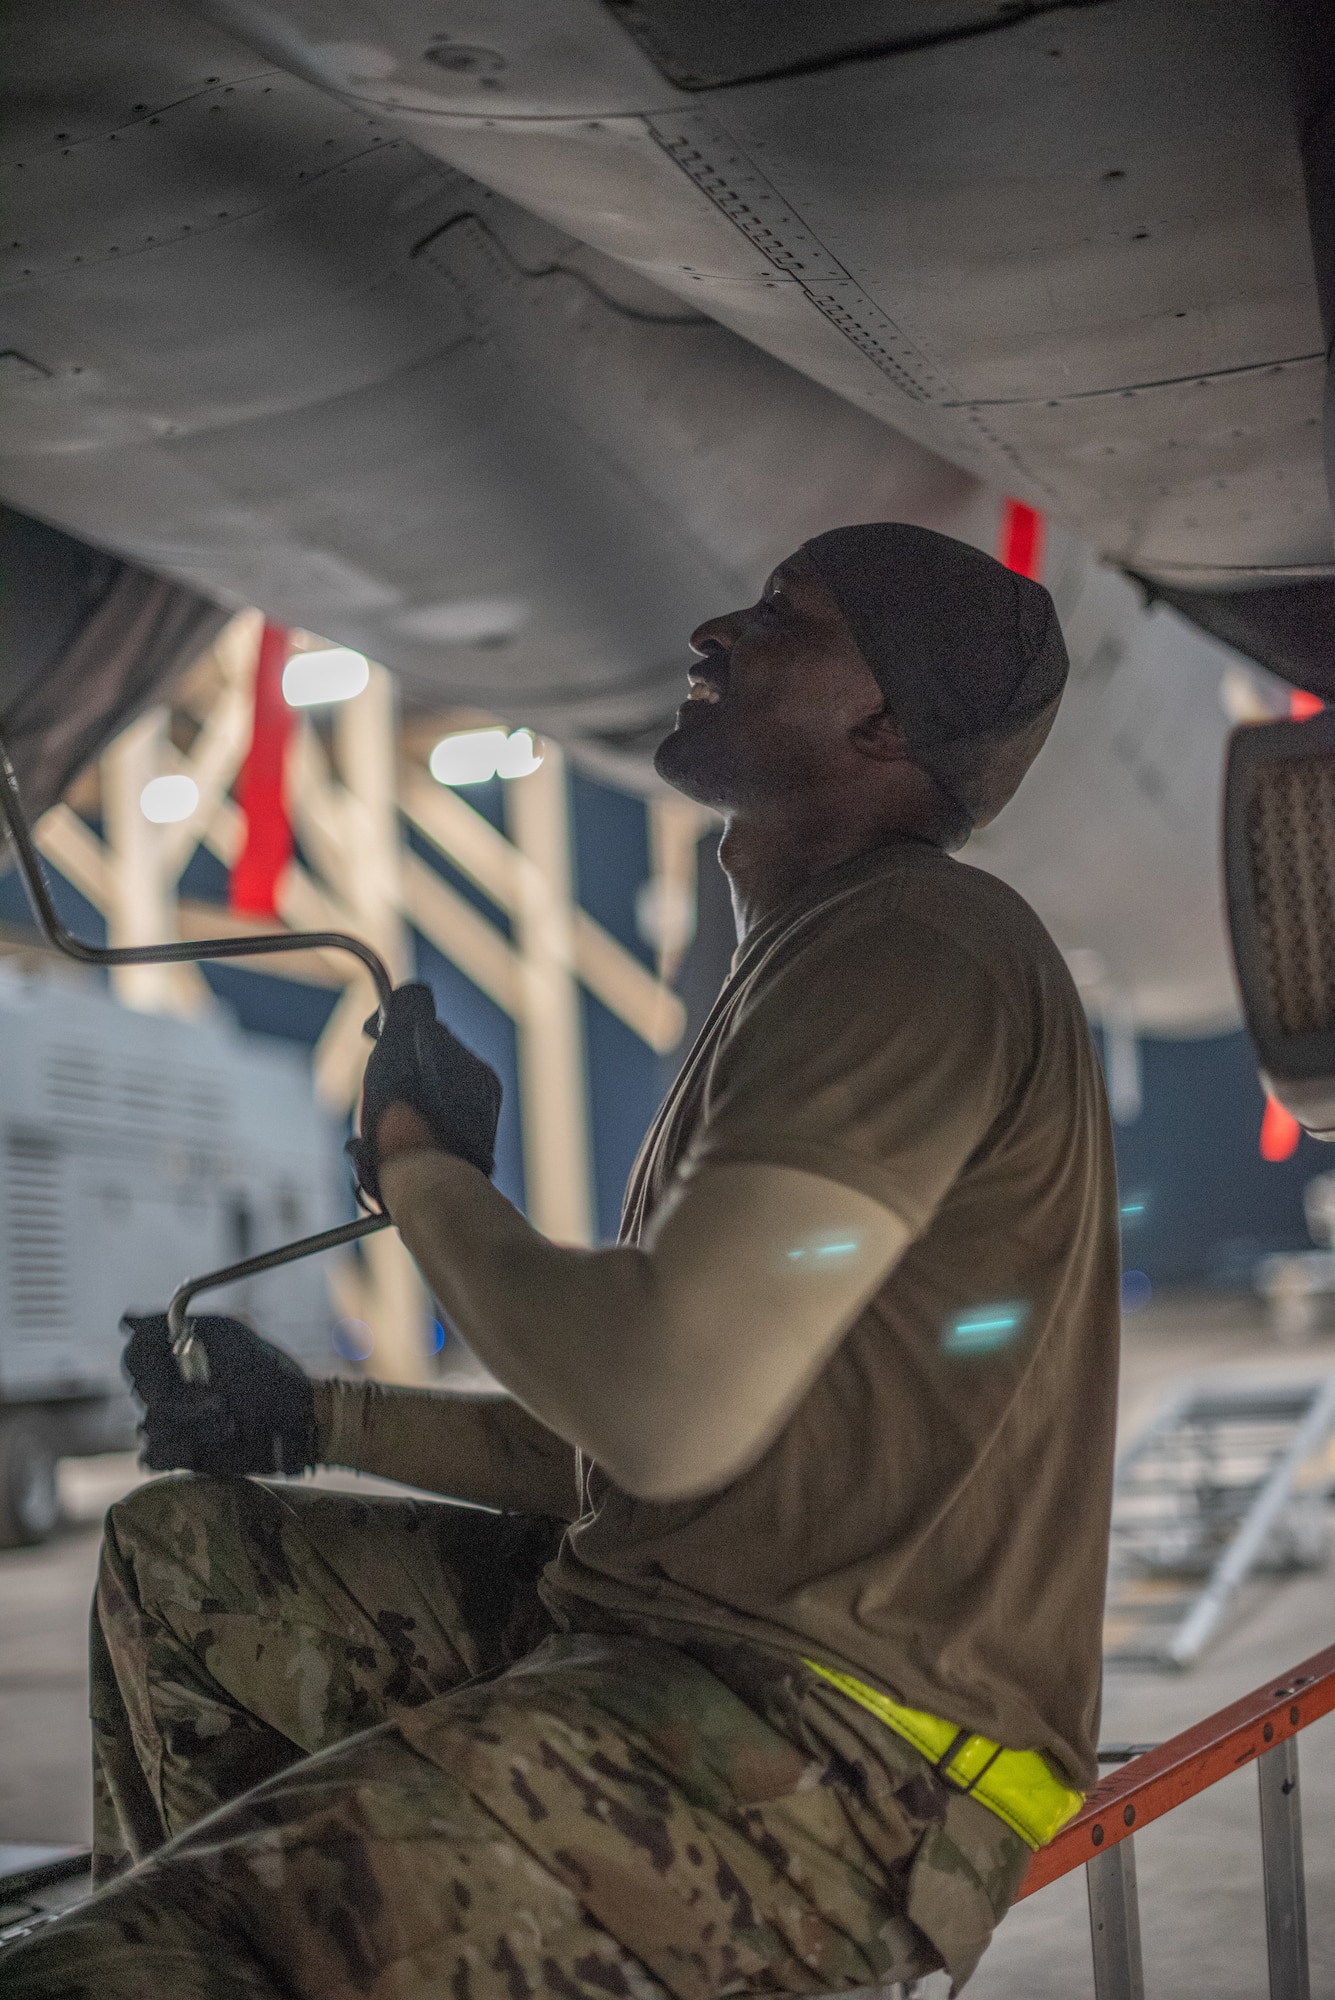 Staff Sgt. Kiefer May, 380th Expeditionary Aircraft Maintenance Squadron weapons load crew team chief, loads an F-15E Strike Eagle with 20mm high-explosive incendiary bullets July 15, 2019, at Al Dhafra Air Base, United Arab Emirates. Weapons load crews work 24/7 operations to support loading and configuring various munitions for the F-35A Lightning II, F-15E Strike Eagle and F-15C Eagle jets at ADAB. (U.S. Air Force photo by Staff Sgt. Chris Thornbury)